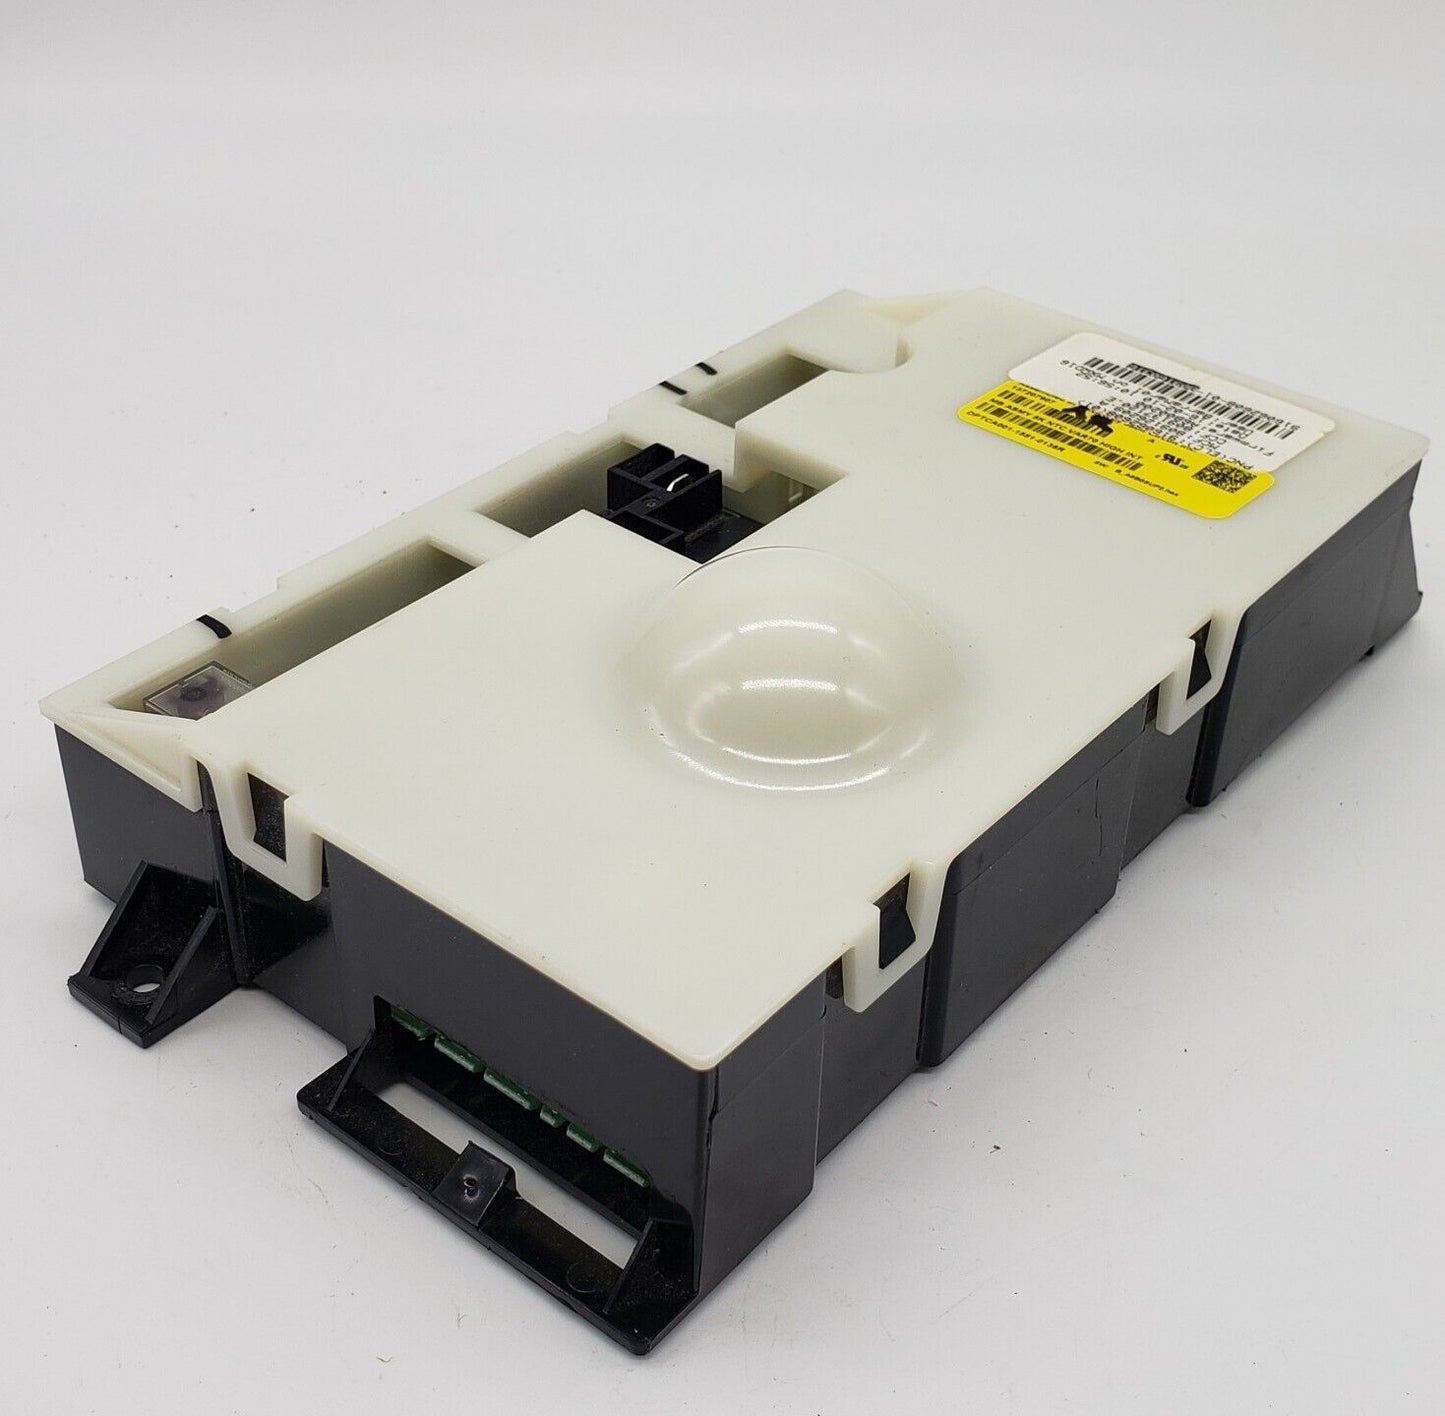 Genuine OEM Replacement for Electrolux Dryer Control 137207907